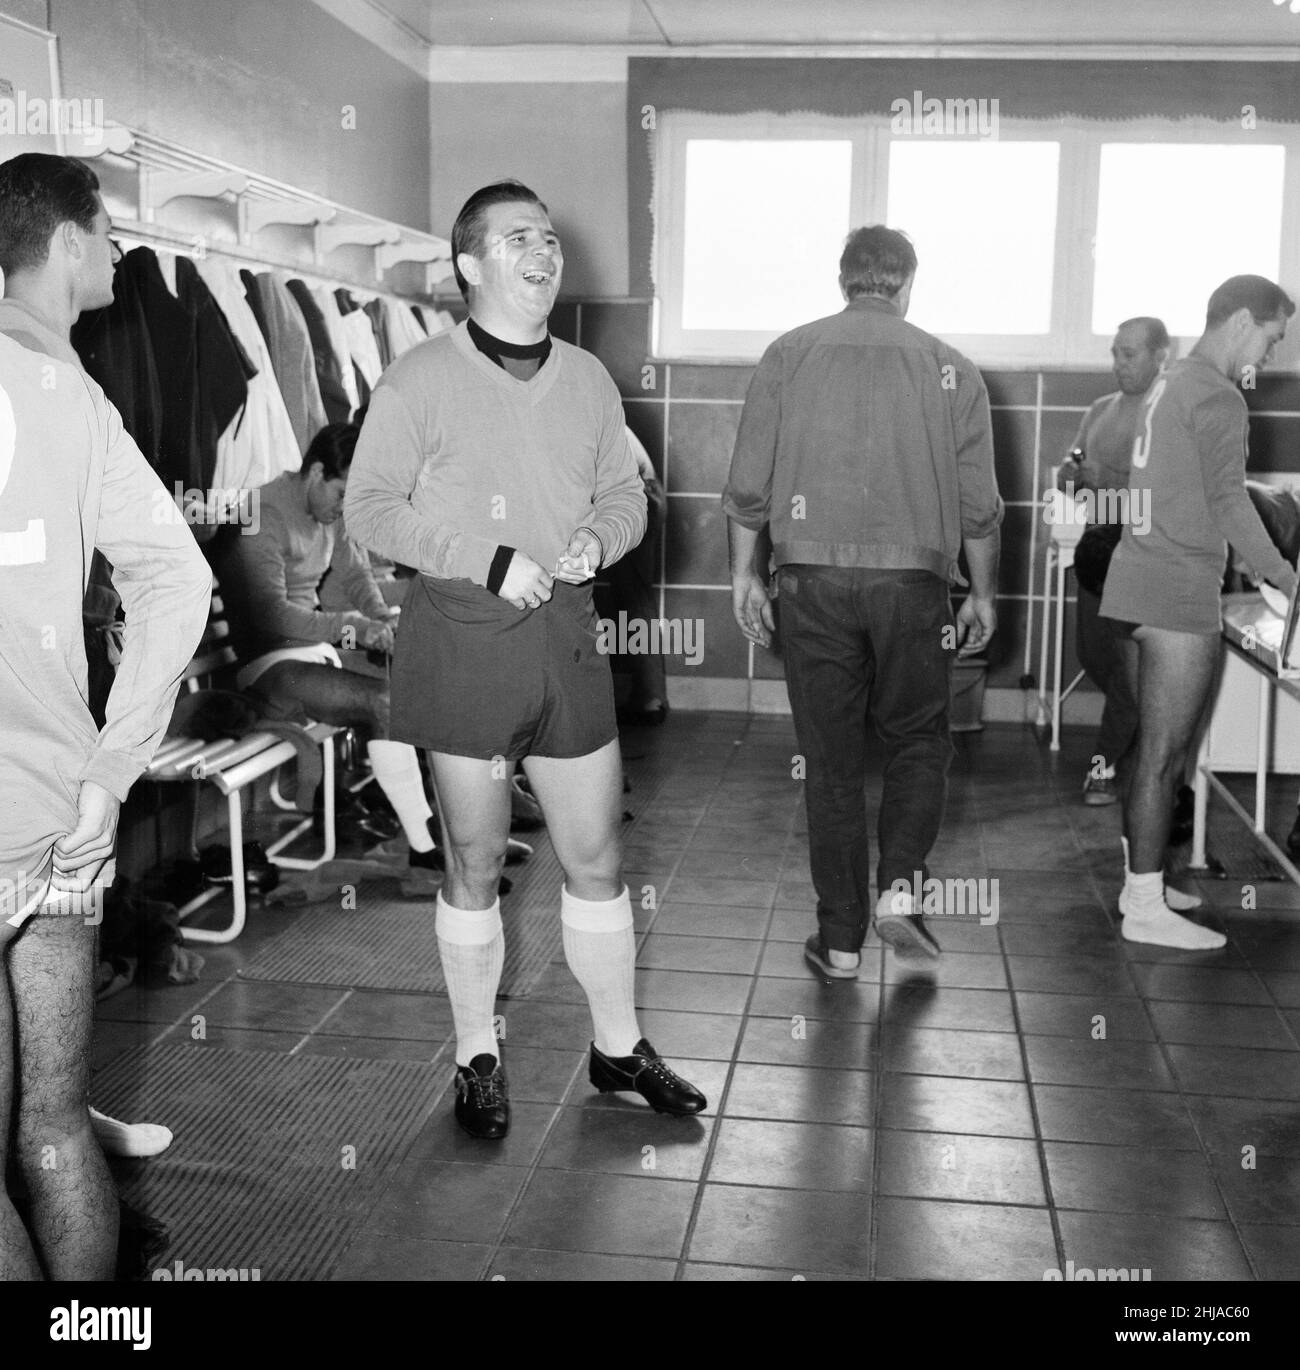 Behind the scenes at Real Madrid Football Club, Santiago Bernabeu Stadium, Madrid, Spain, 24th May 1964. Three days prior to European Cup Final v Inter Milan. Pictured, Ferenc Puskás in changing room, preparing for training session. Stock Photo